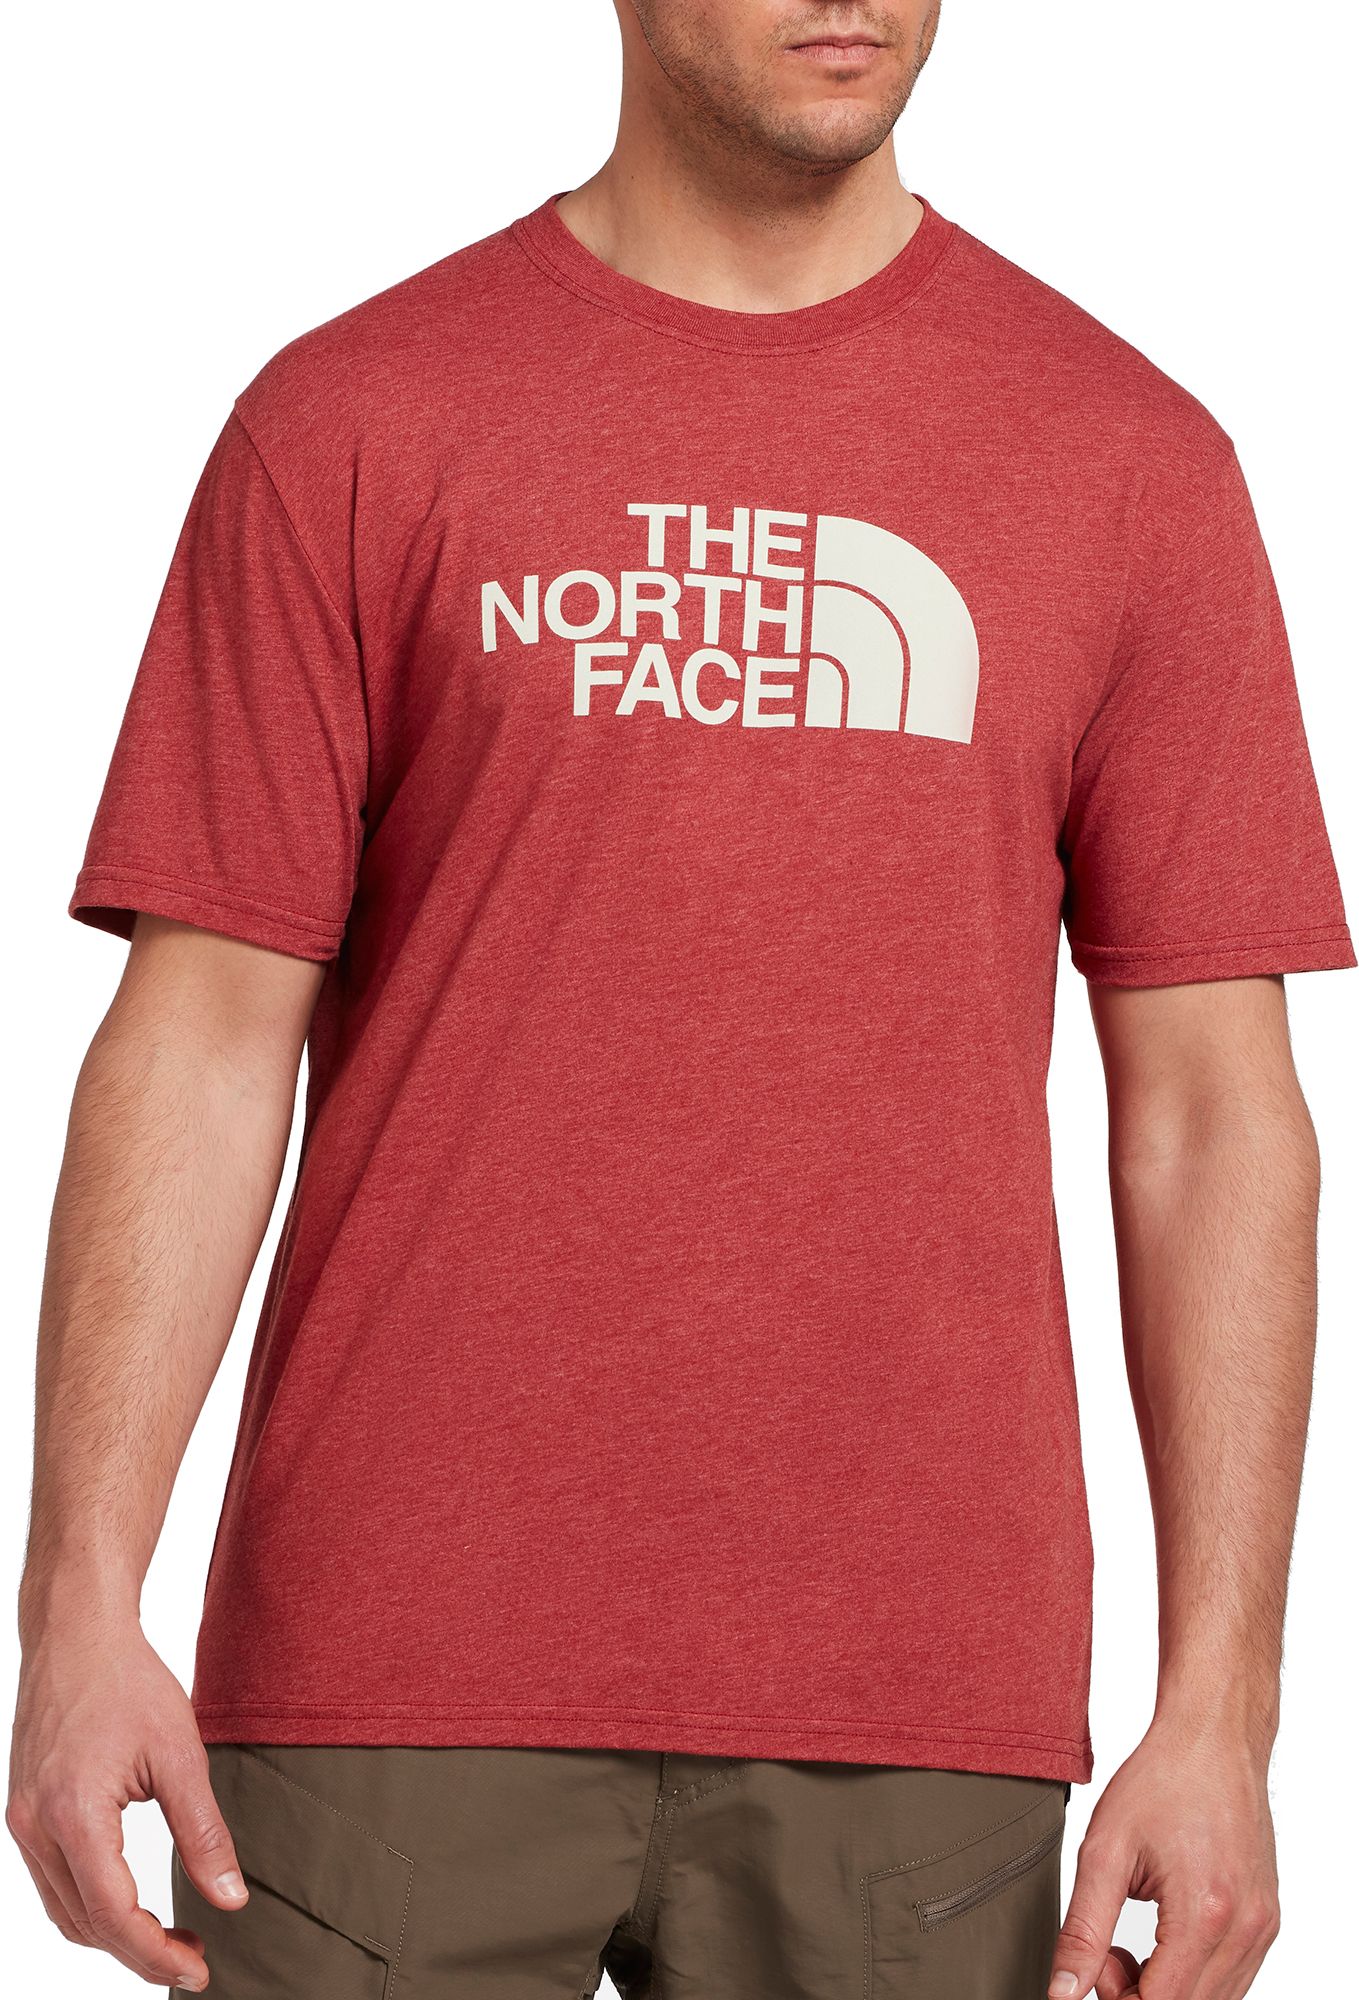 The North Face Men's Shirts Online Store, UP TO 67% OFF | www 